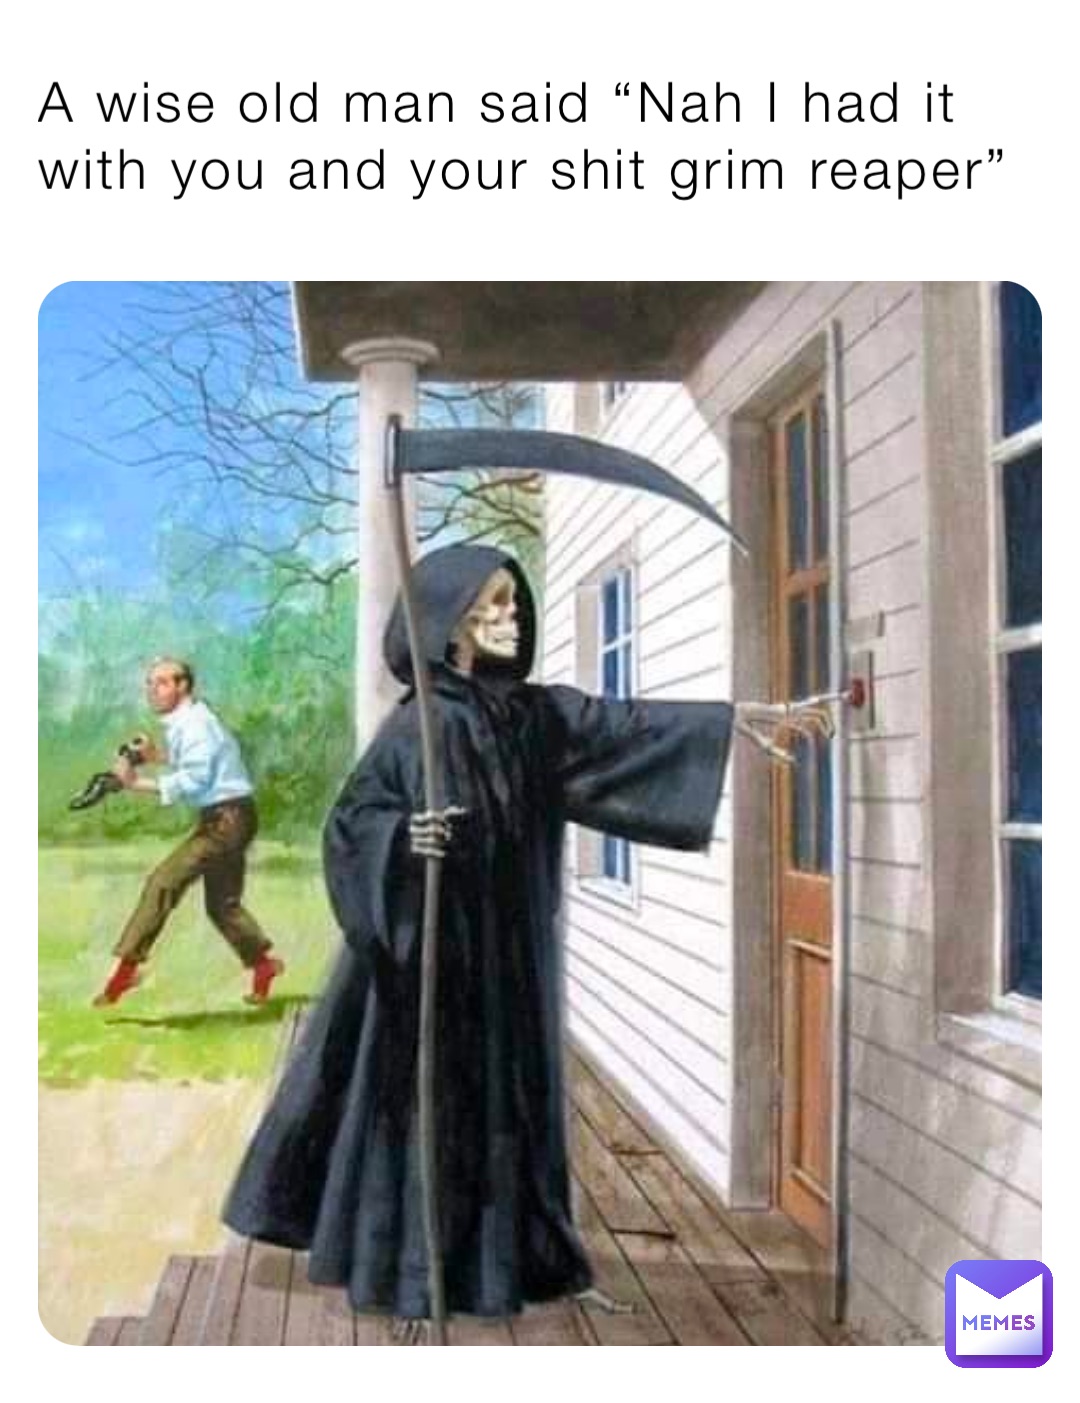 A wise old man said “Nah I had it with you and your shit grim reaper”